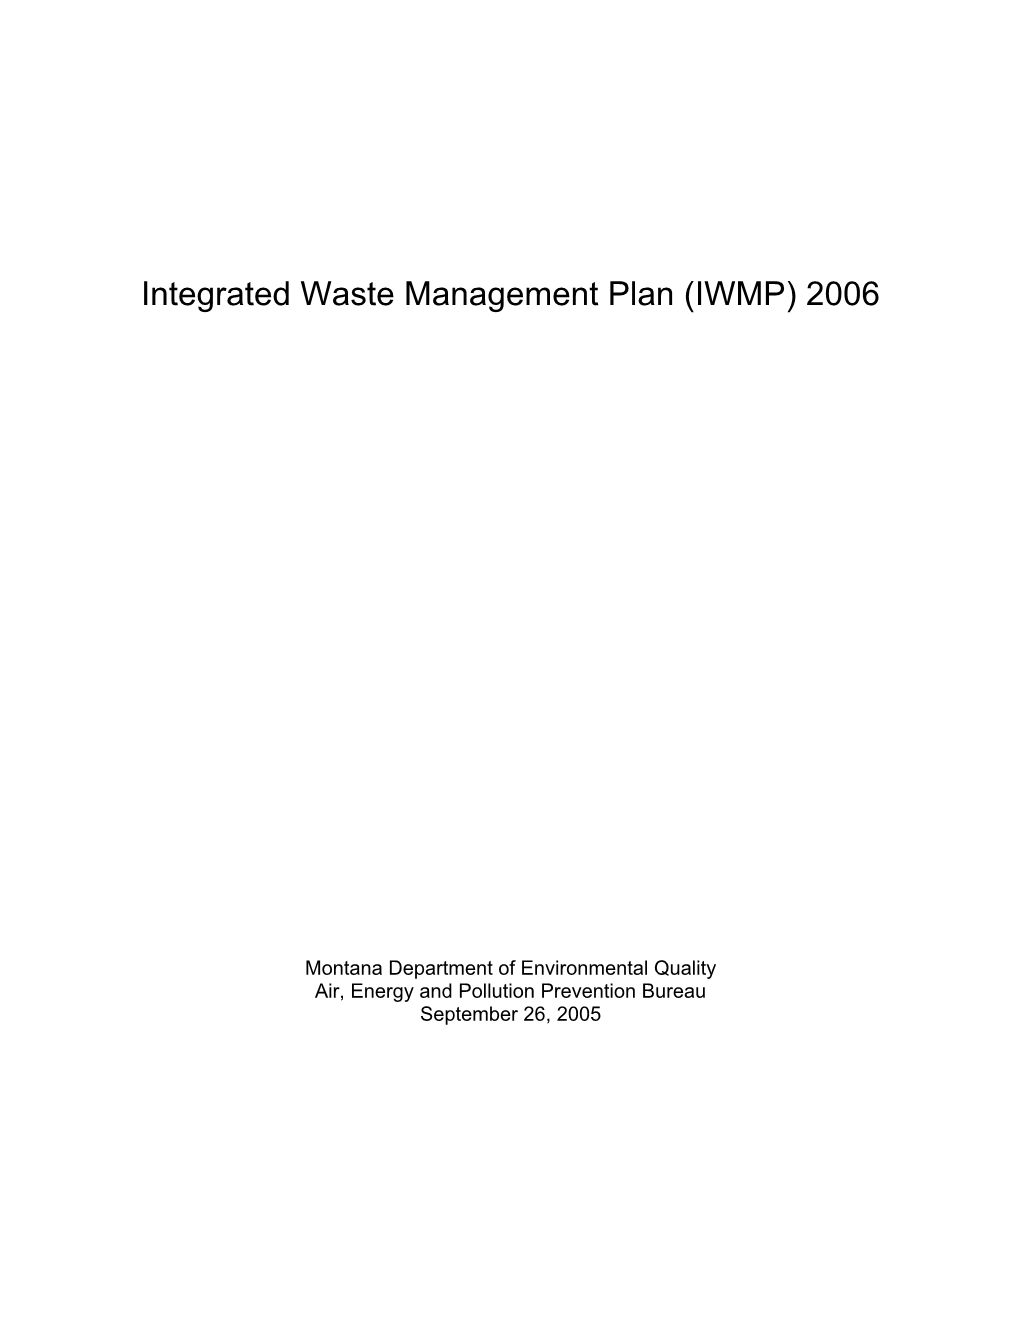 Integrated Waste Management Plan (IWMP) 2006